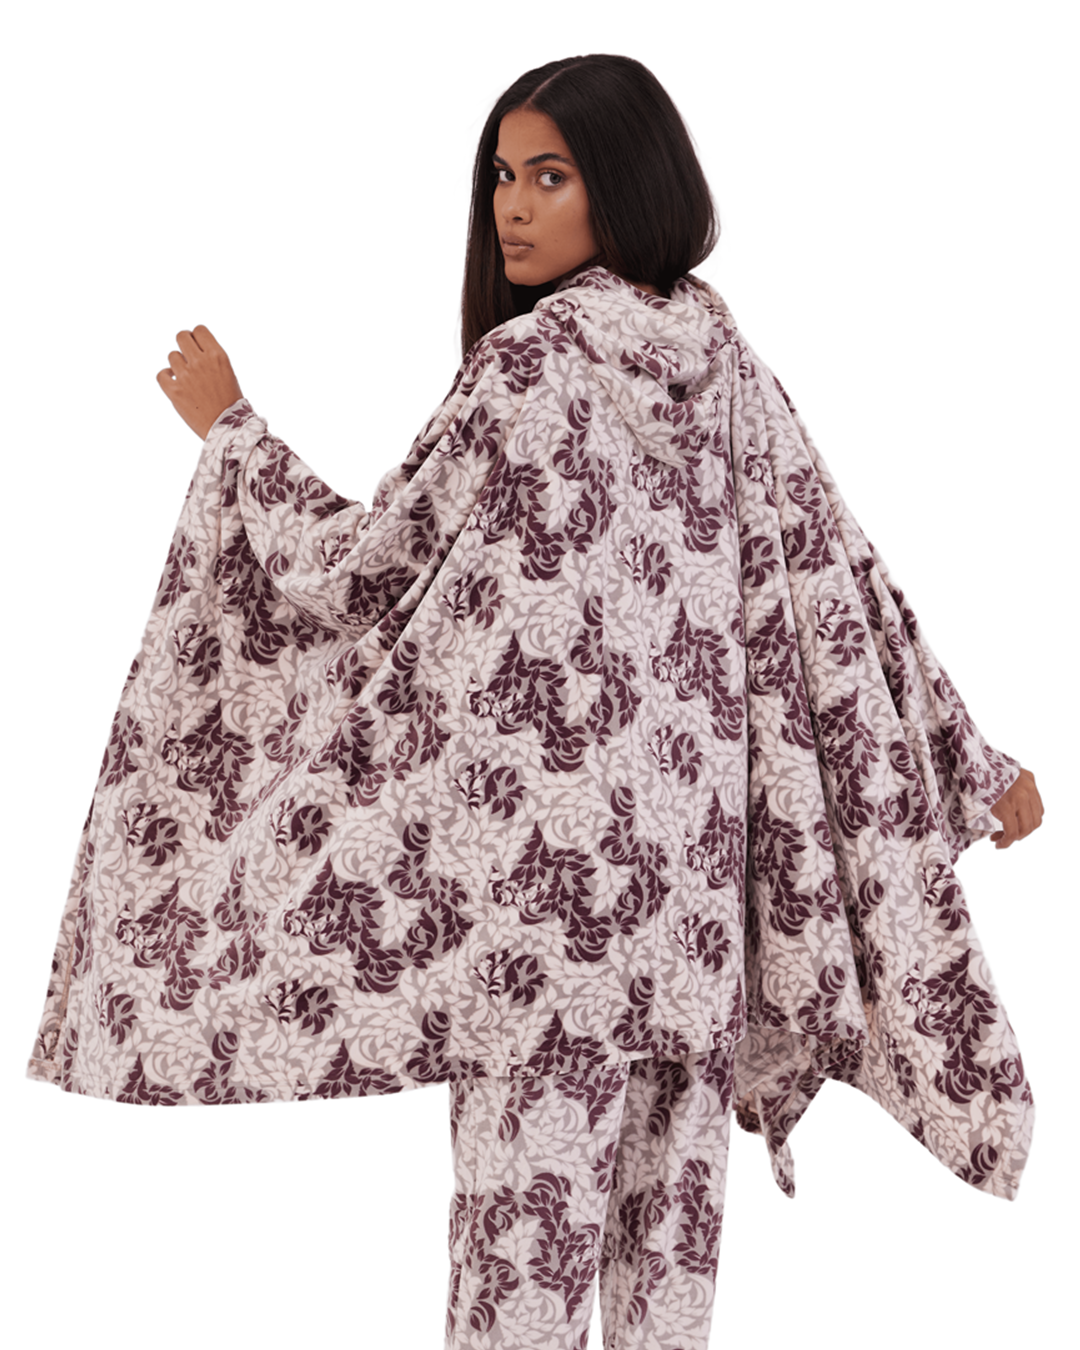 Leaves Winter Poncho Free Size